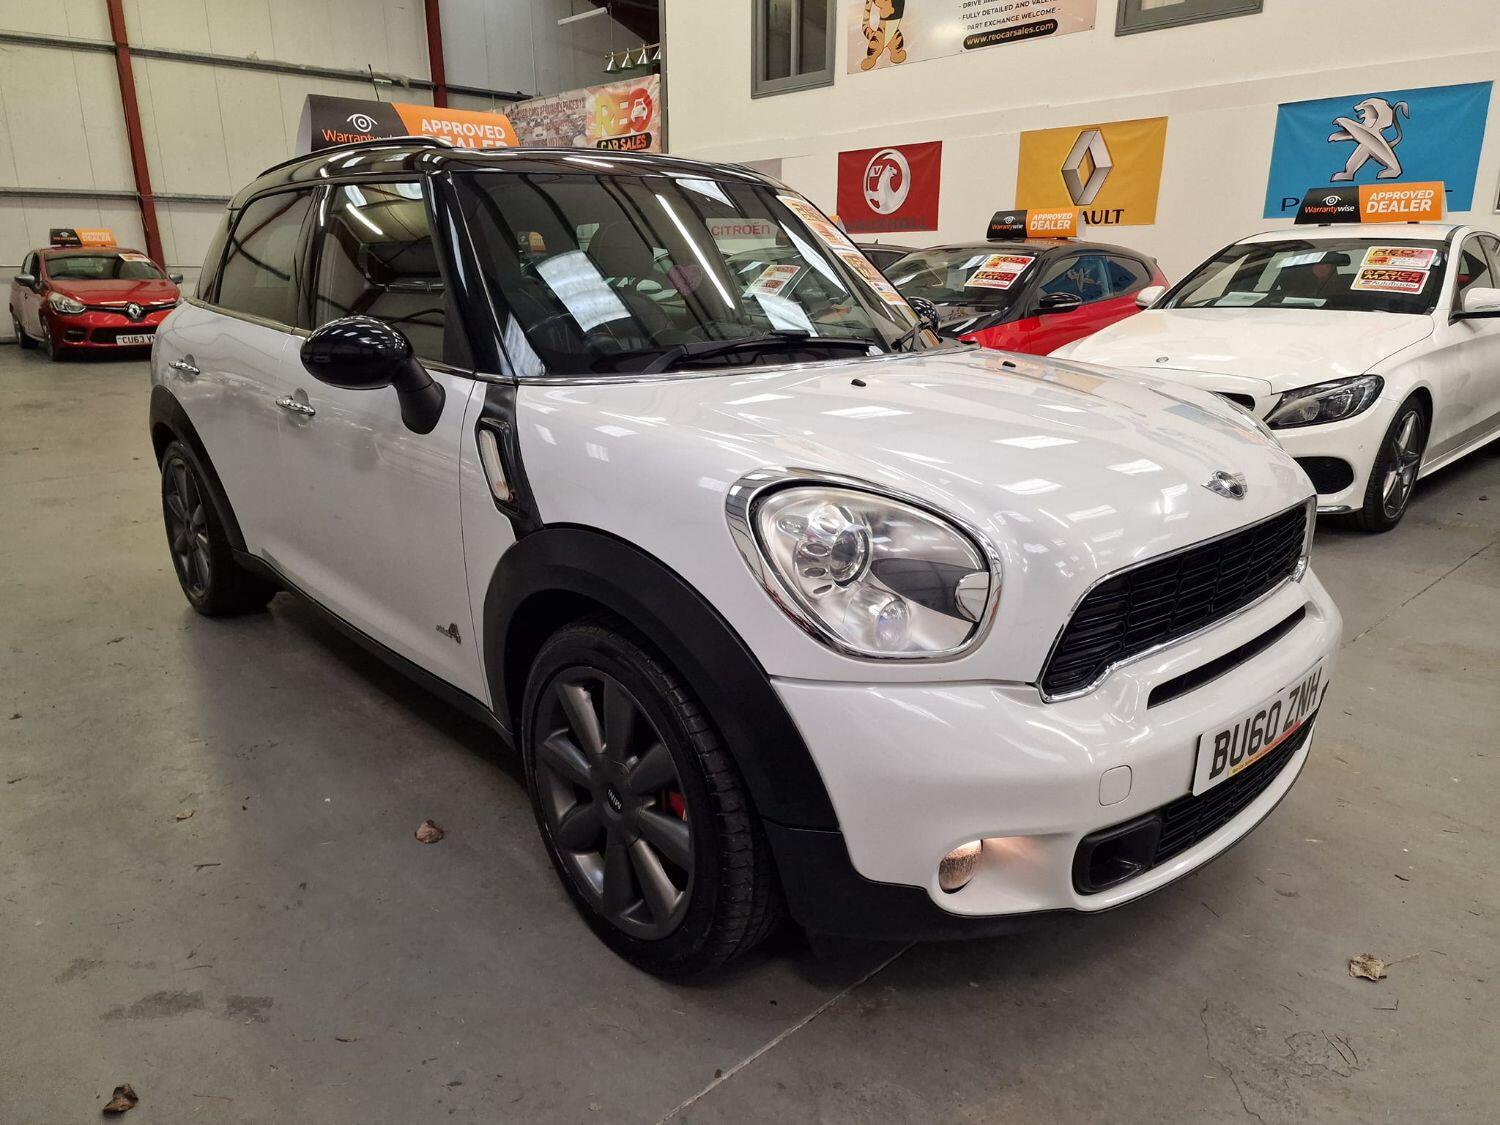 Used MINI COUNTRYMAN in Cwmtillery Abertillery Gwent, South Wales | REO ...